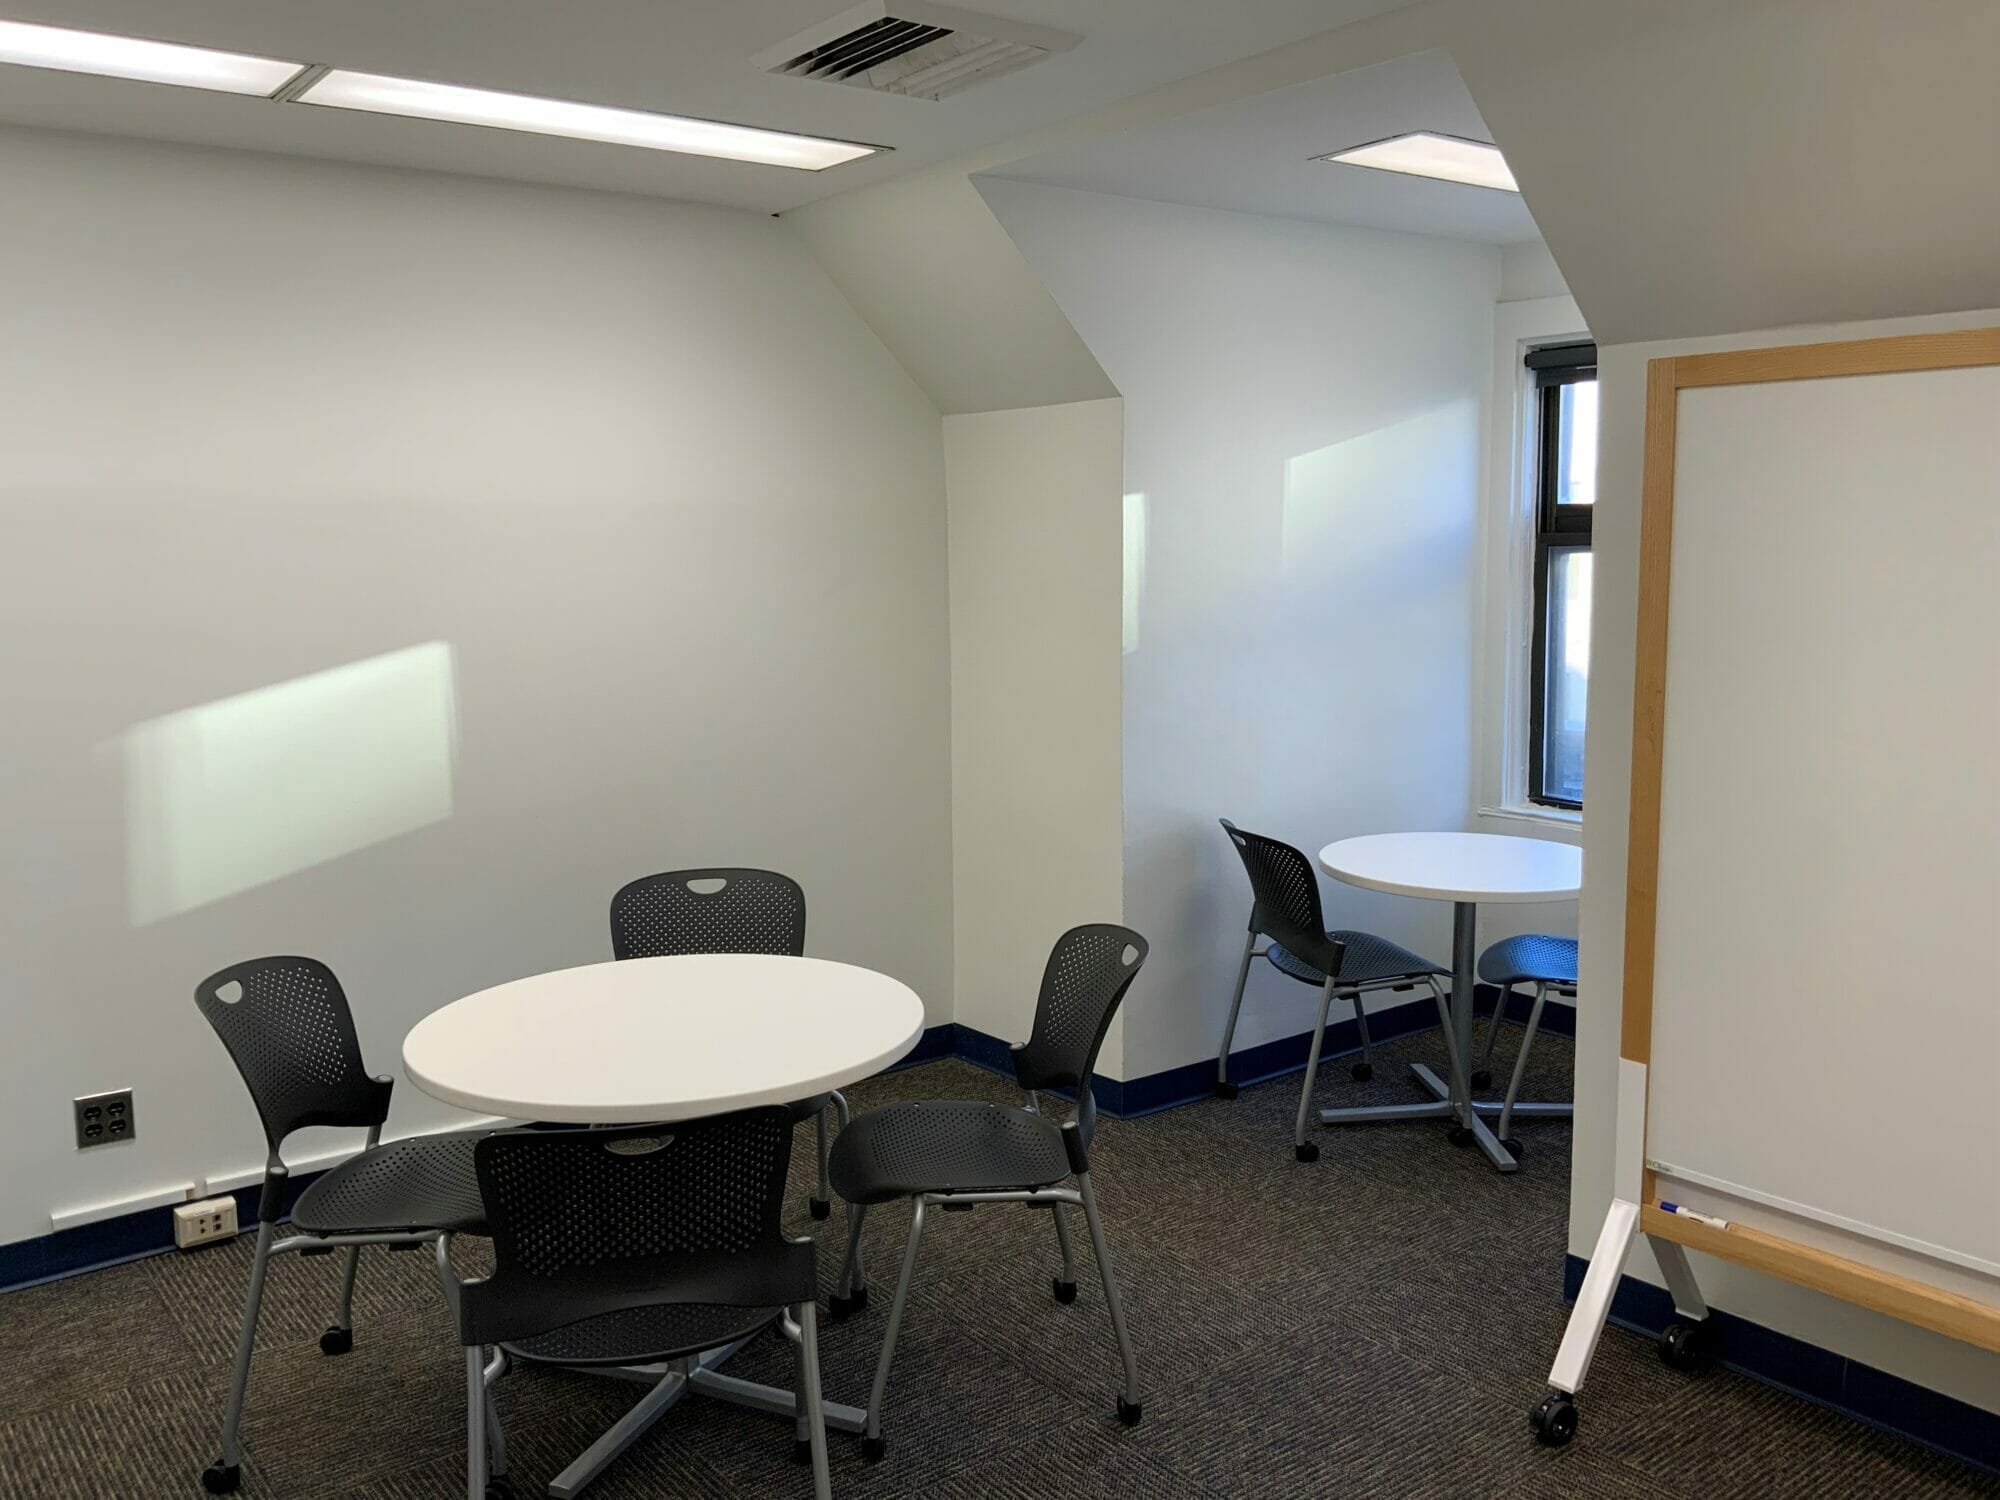 Student conference room 411